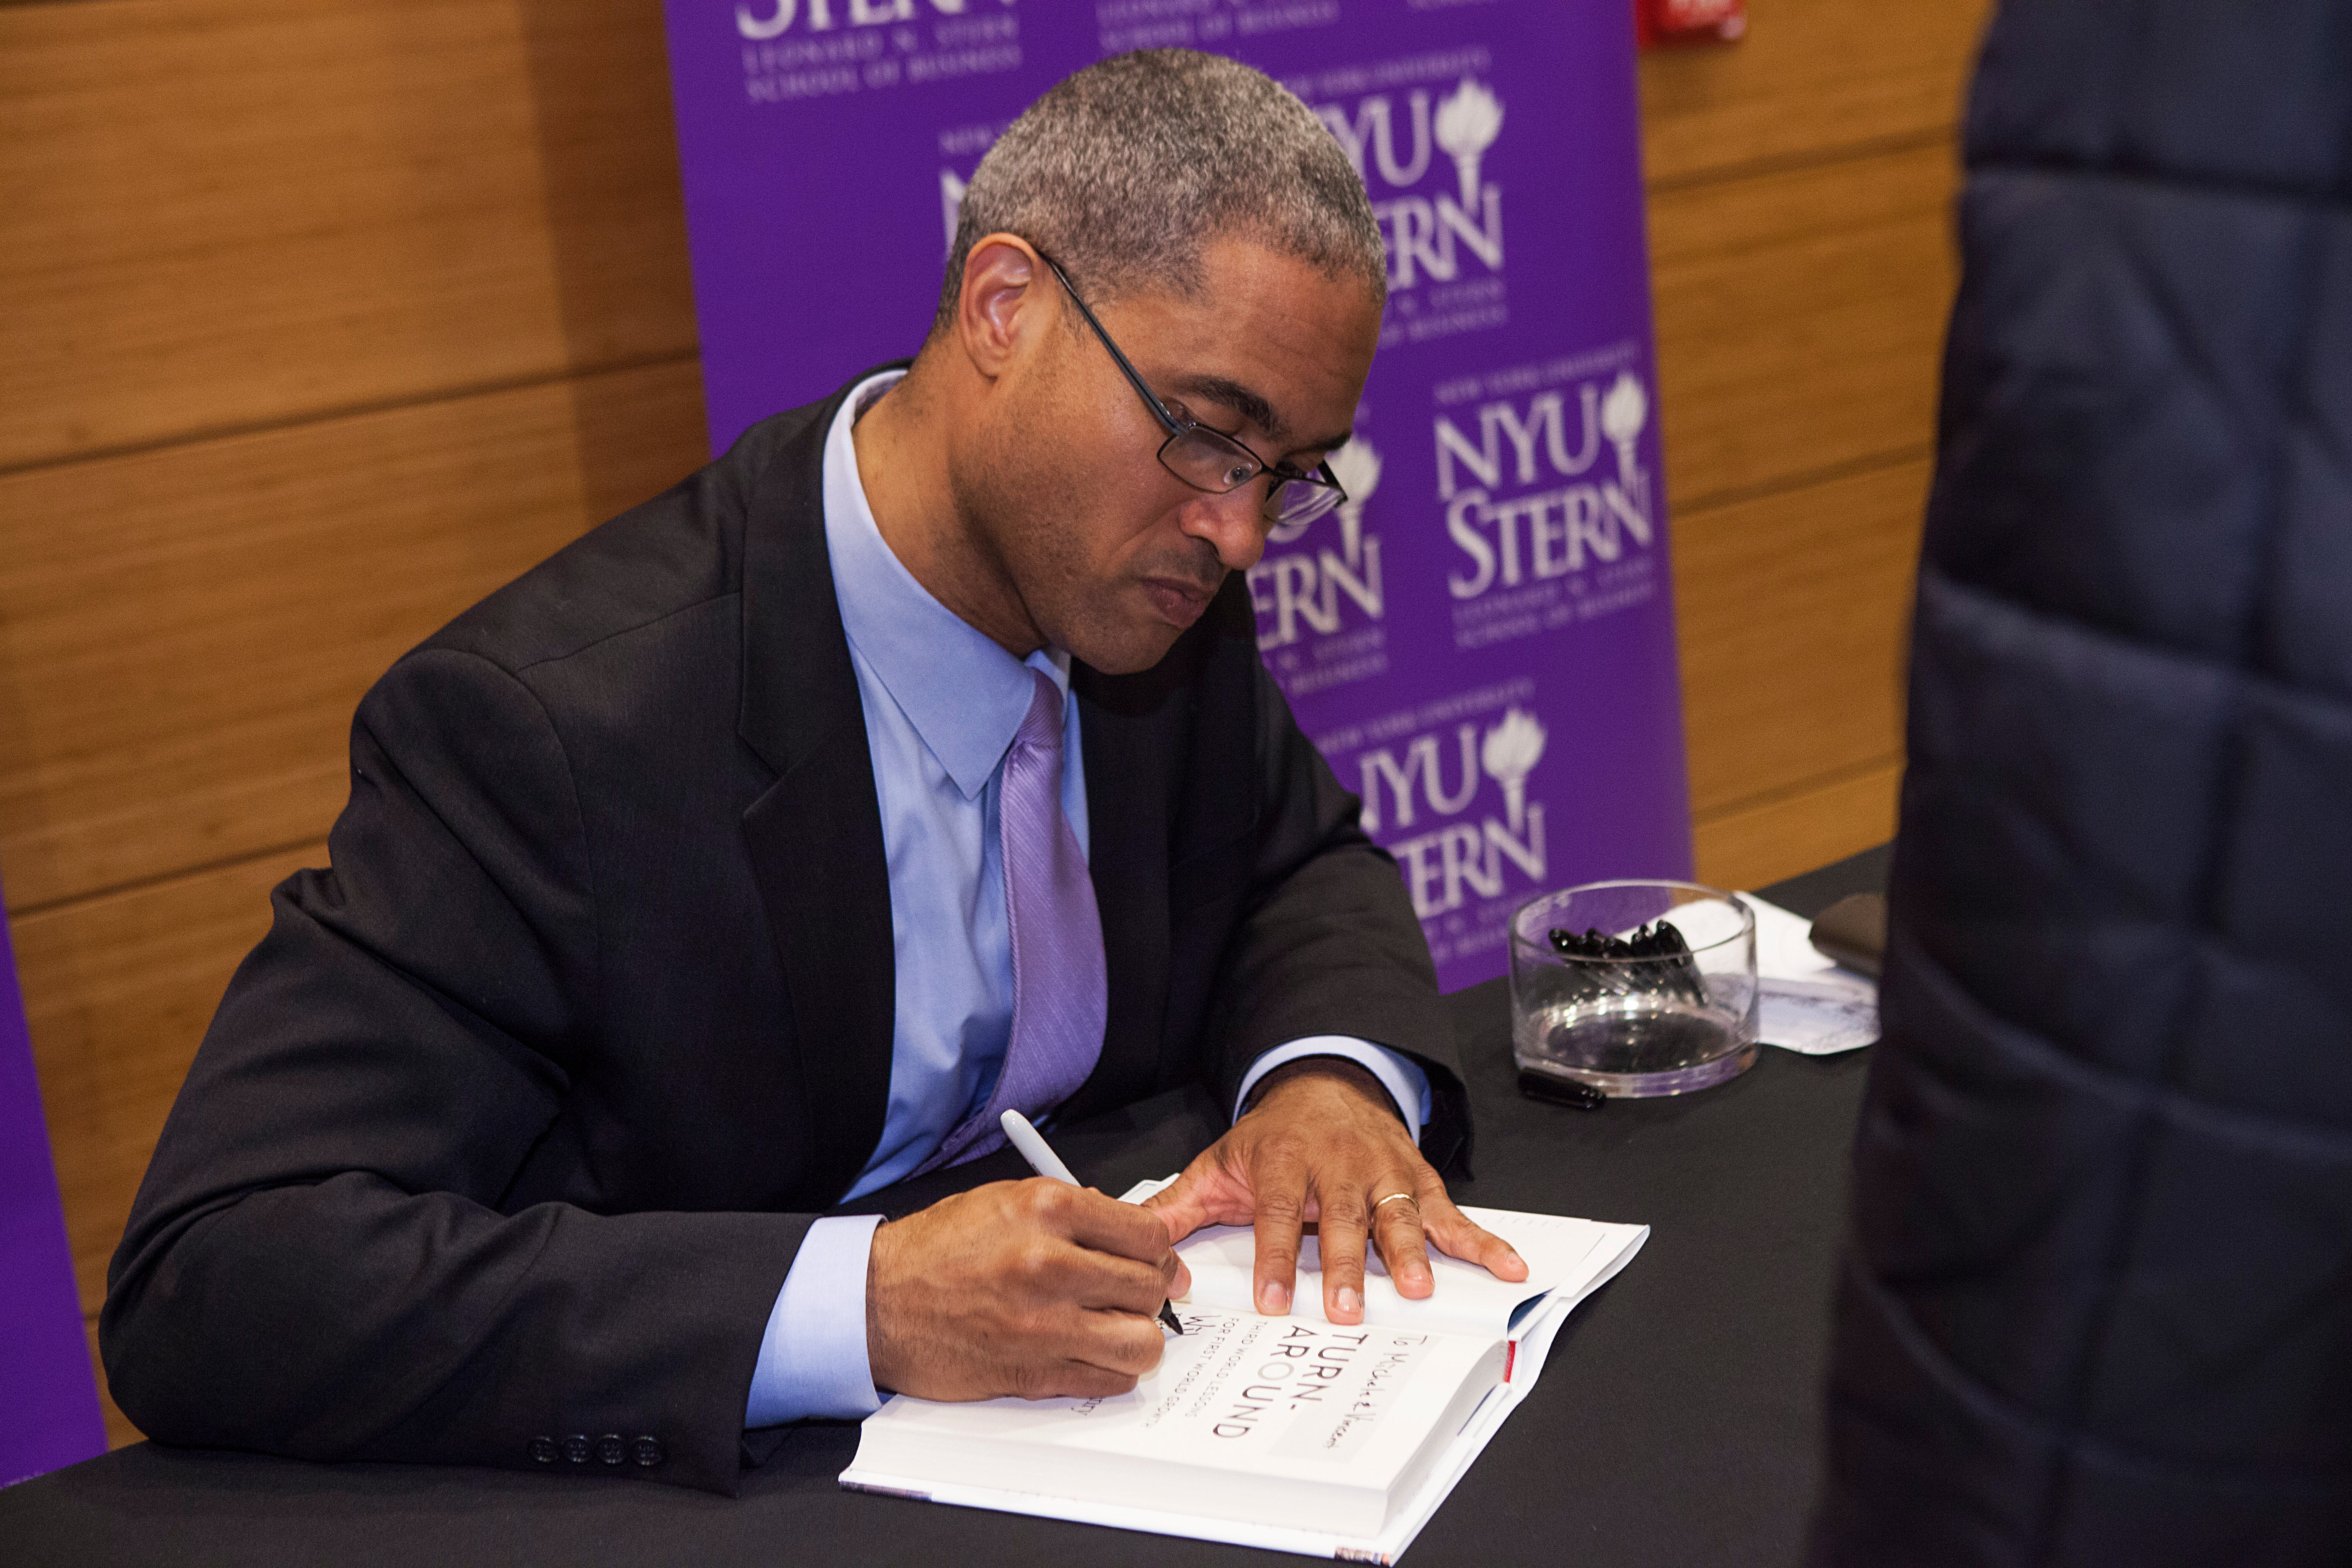 Dean Peter Henry Book Signing